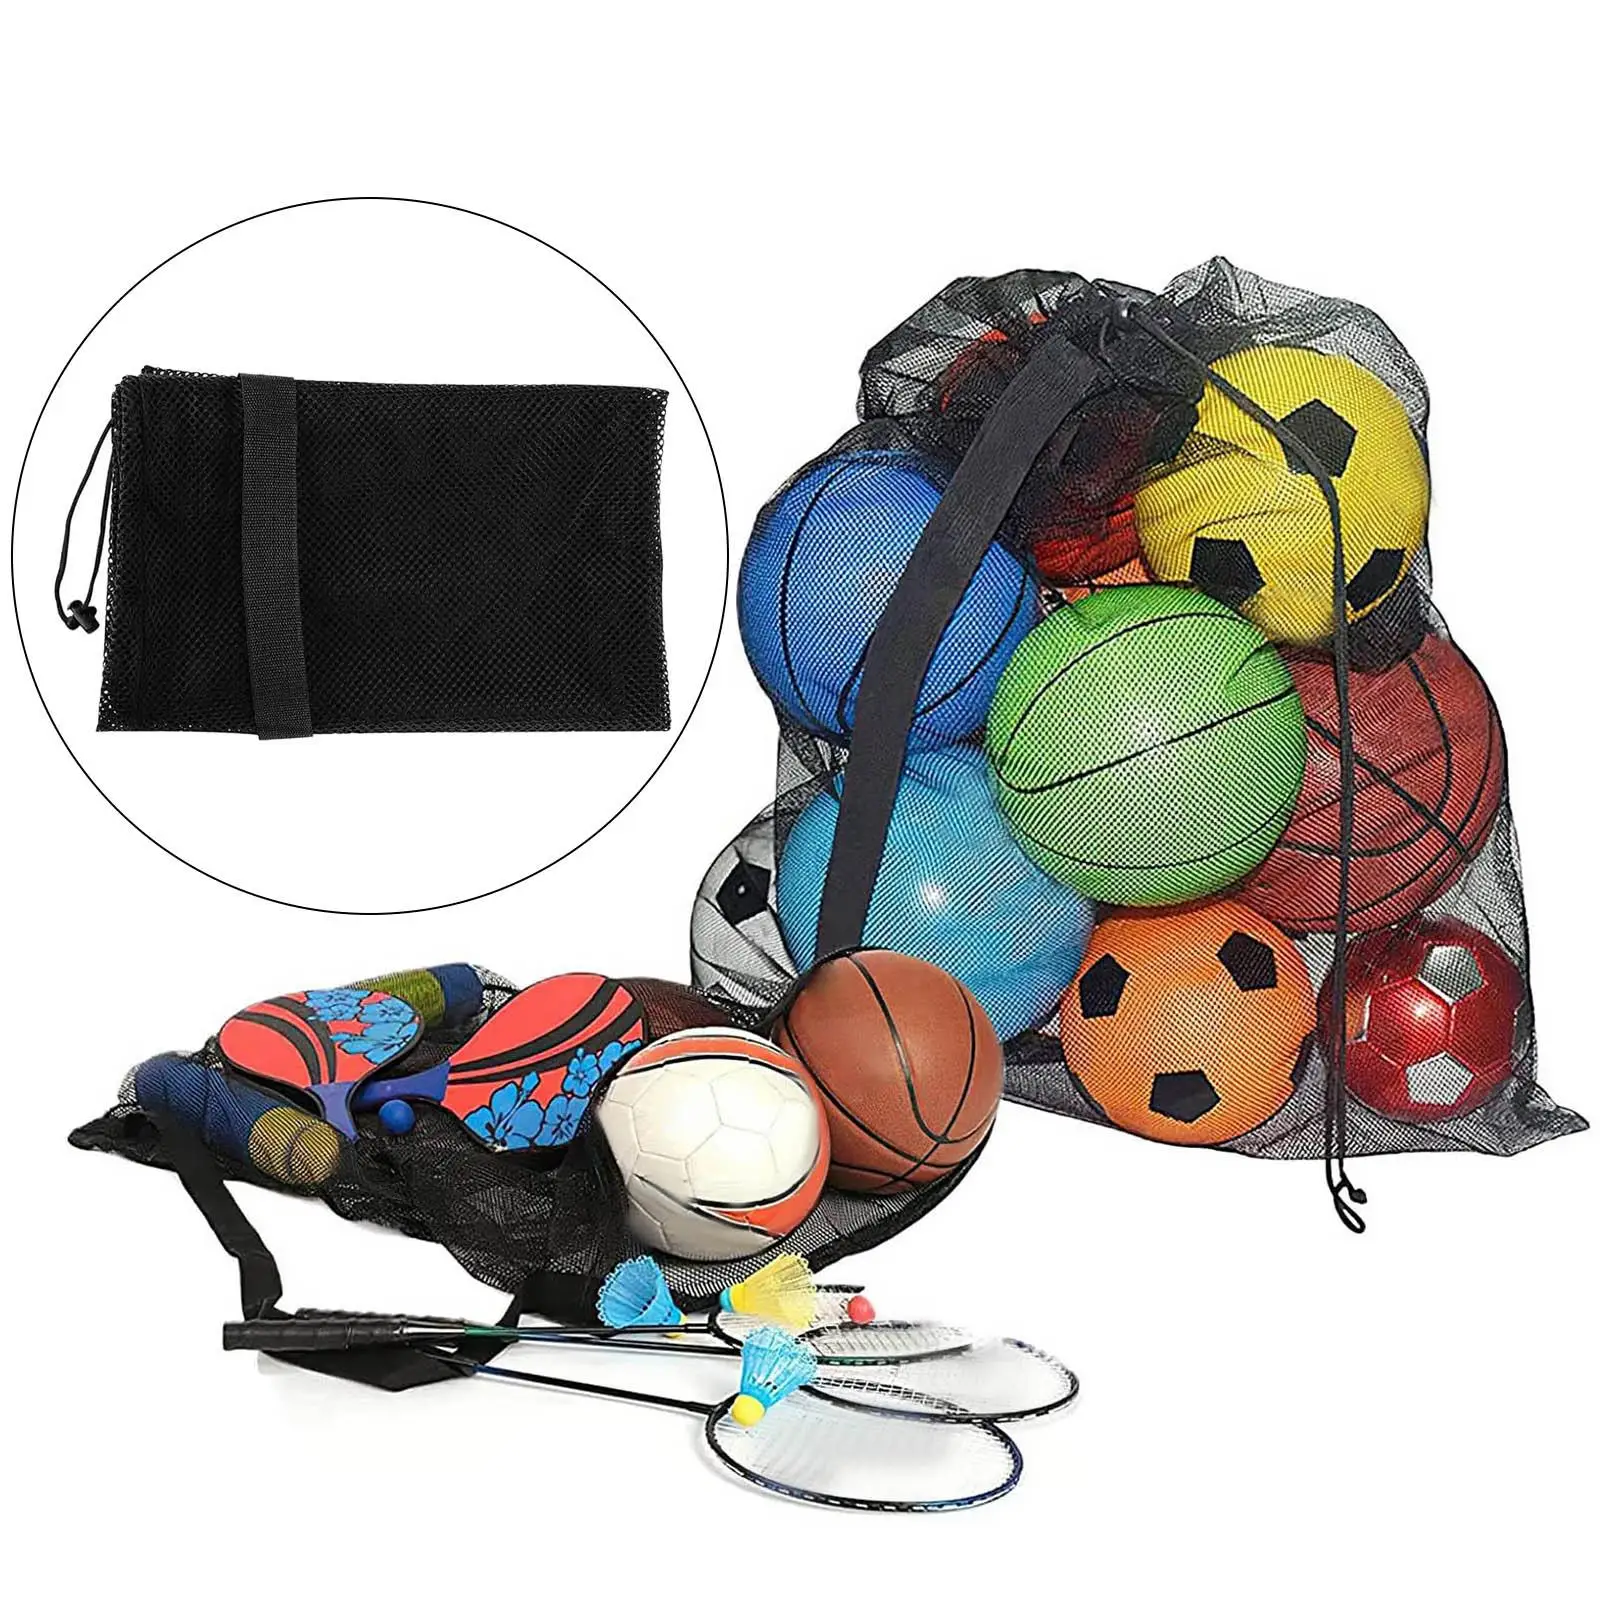 Mesh Ball Bag Gym Sport Equipment Storage Drawstring with Adjustable Strap Extra Large Sports Ball Bag for Soccer Volleyball